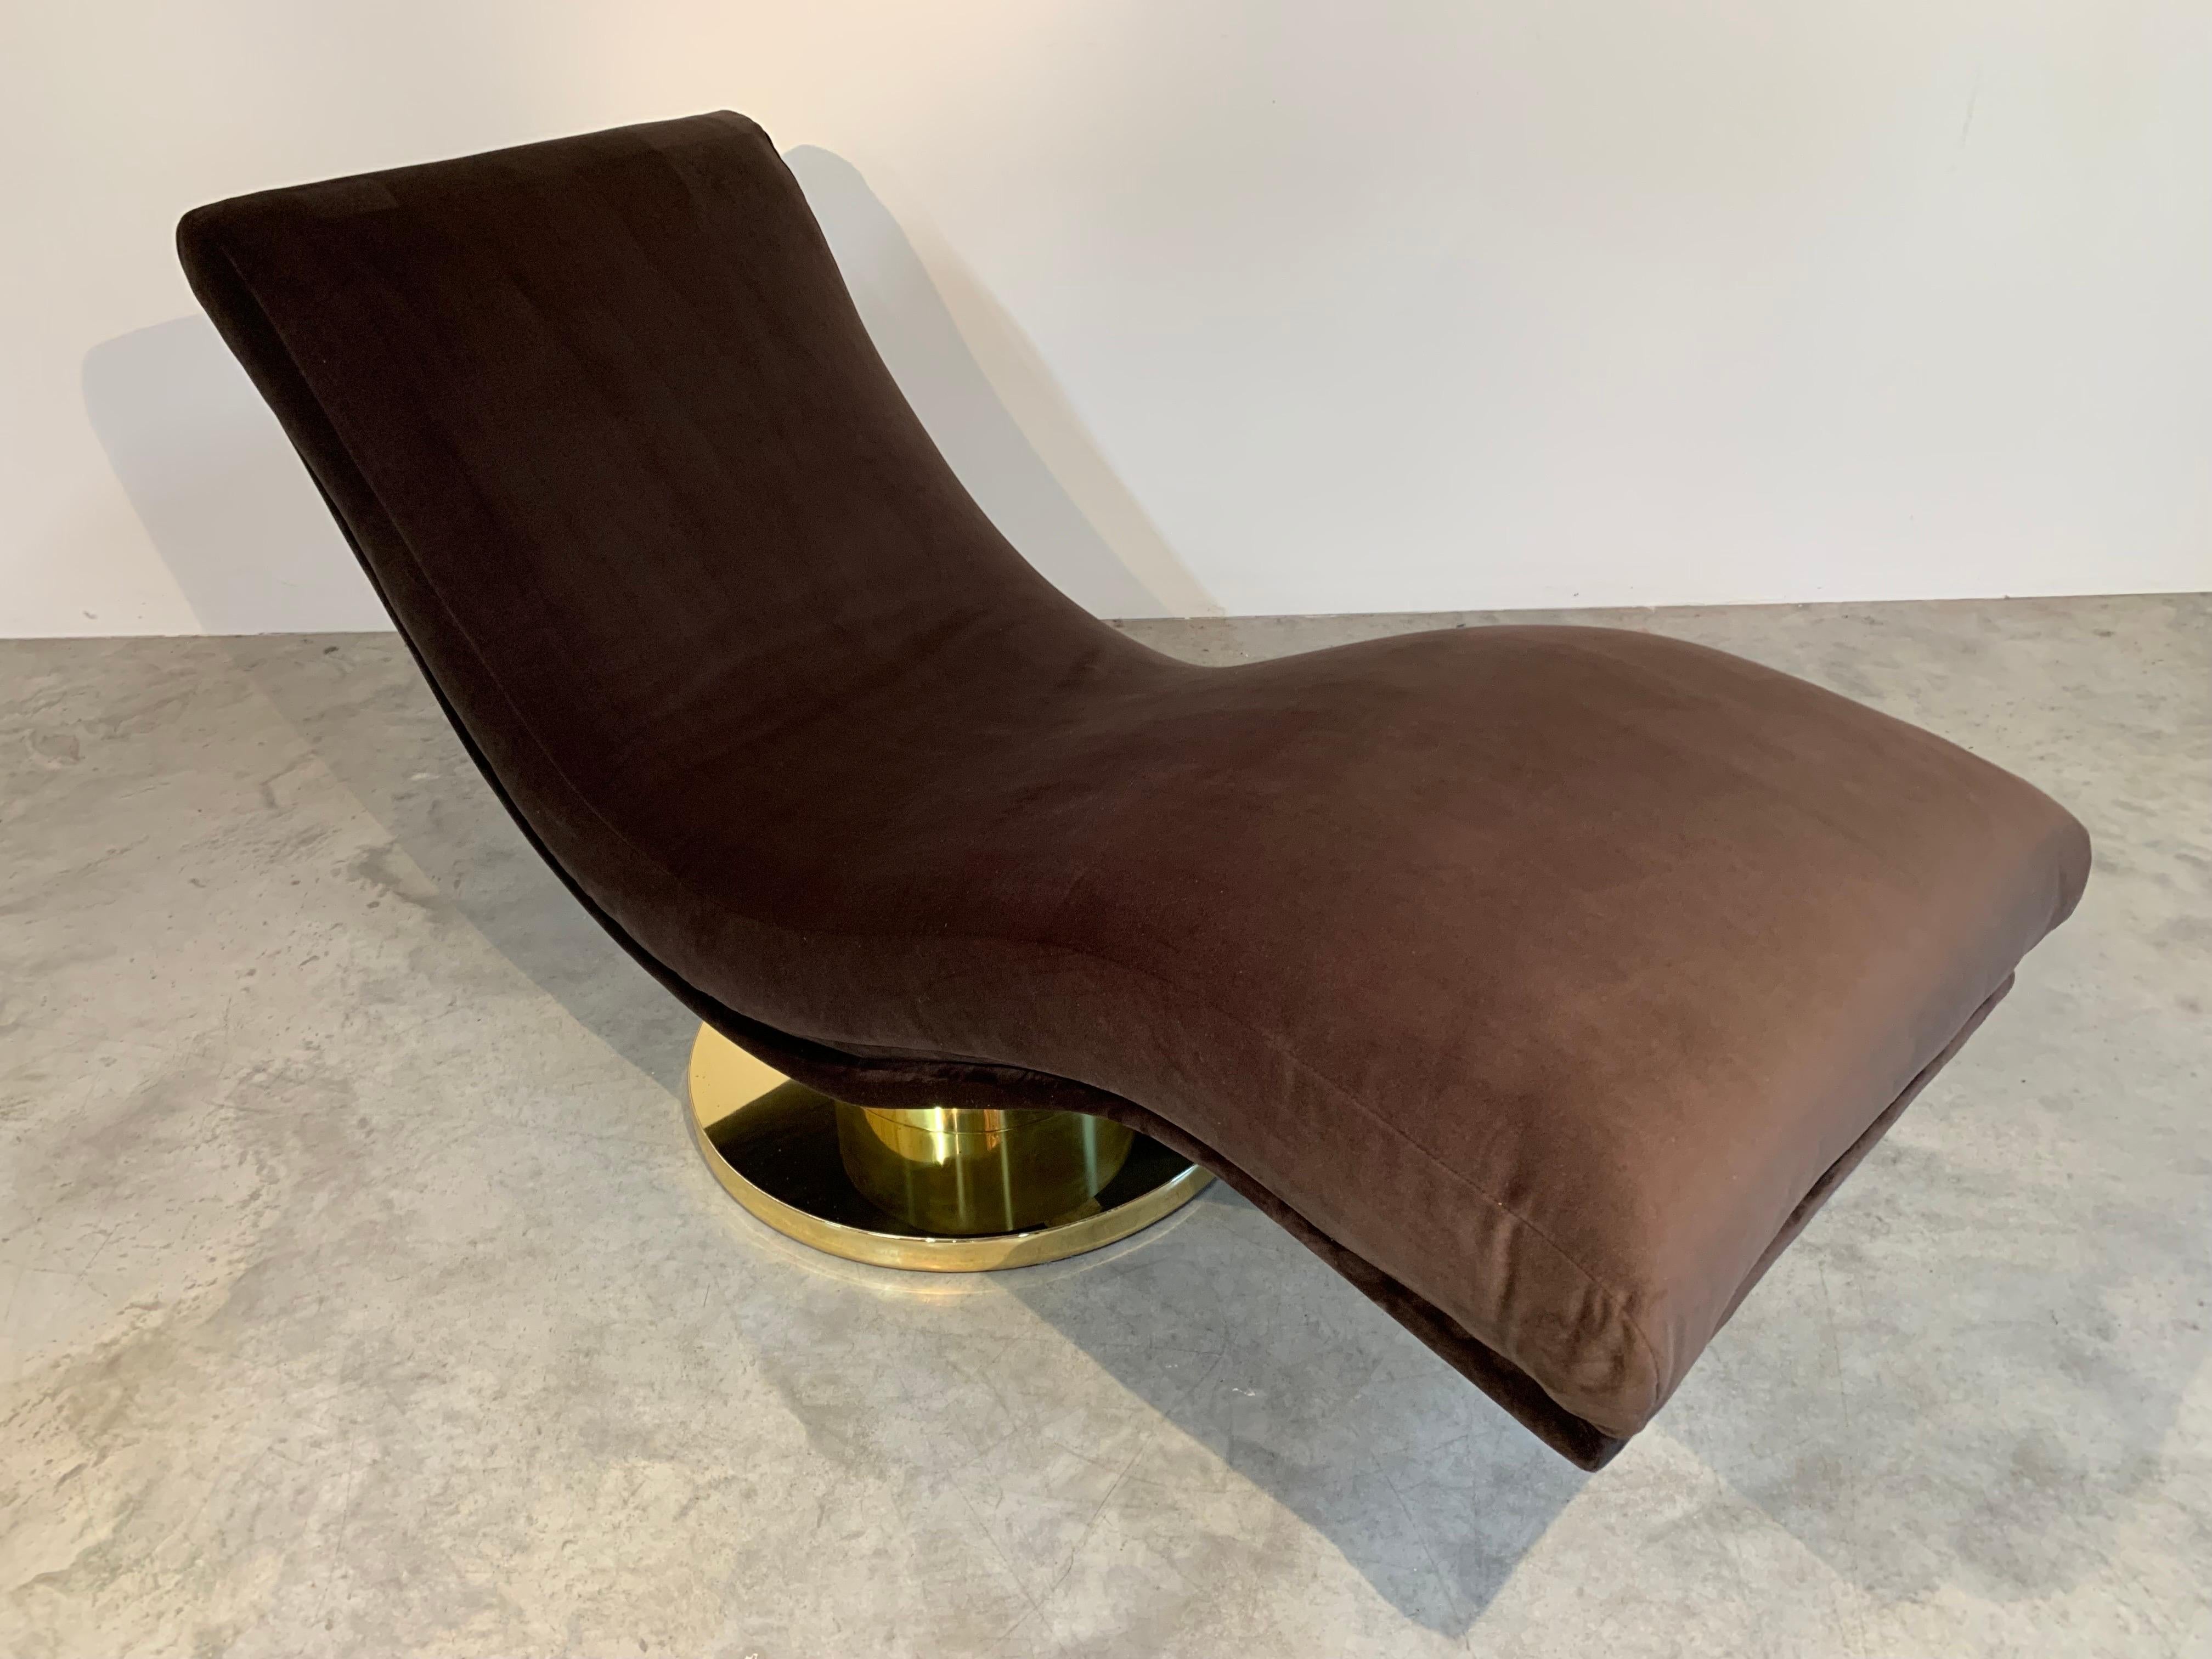 Milo baughman for Thayer Coggin swiveling ‘Wave’ Chaise Lounge in 